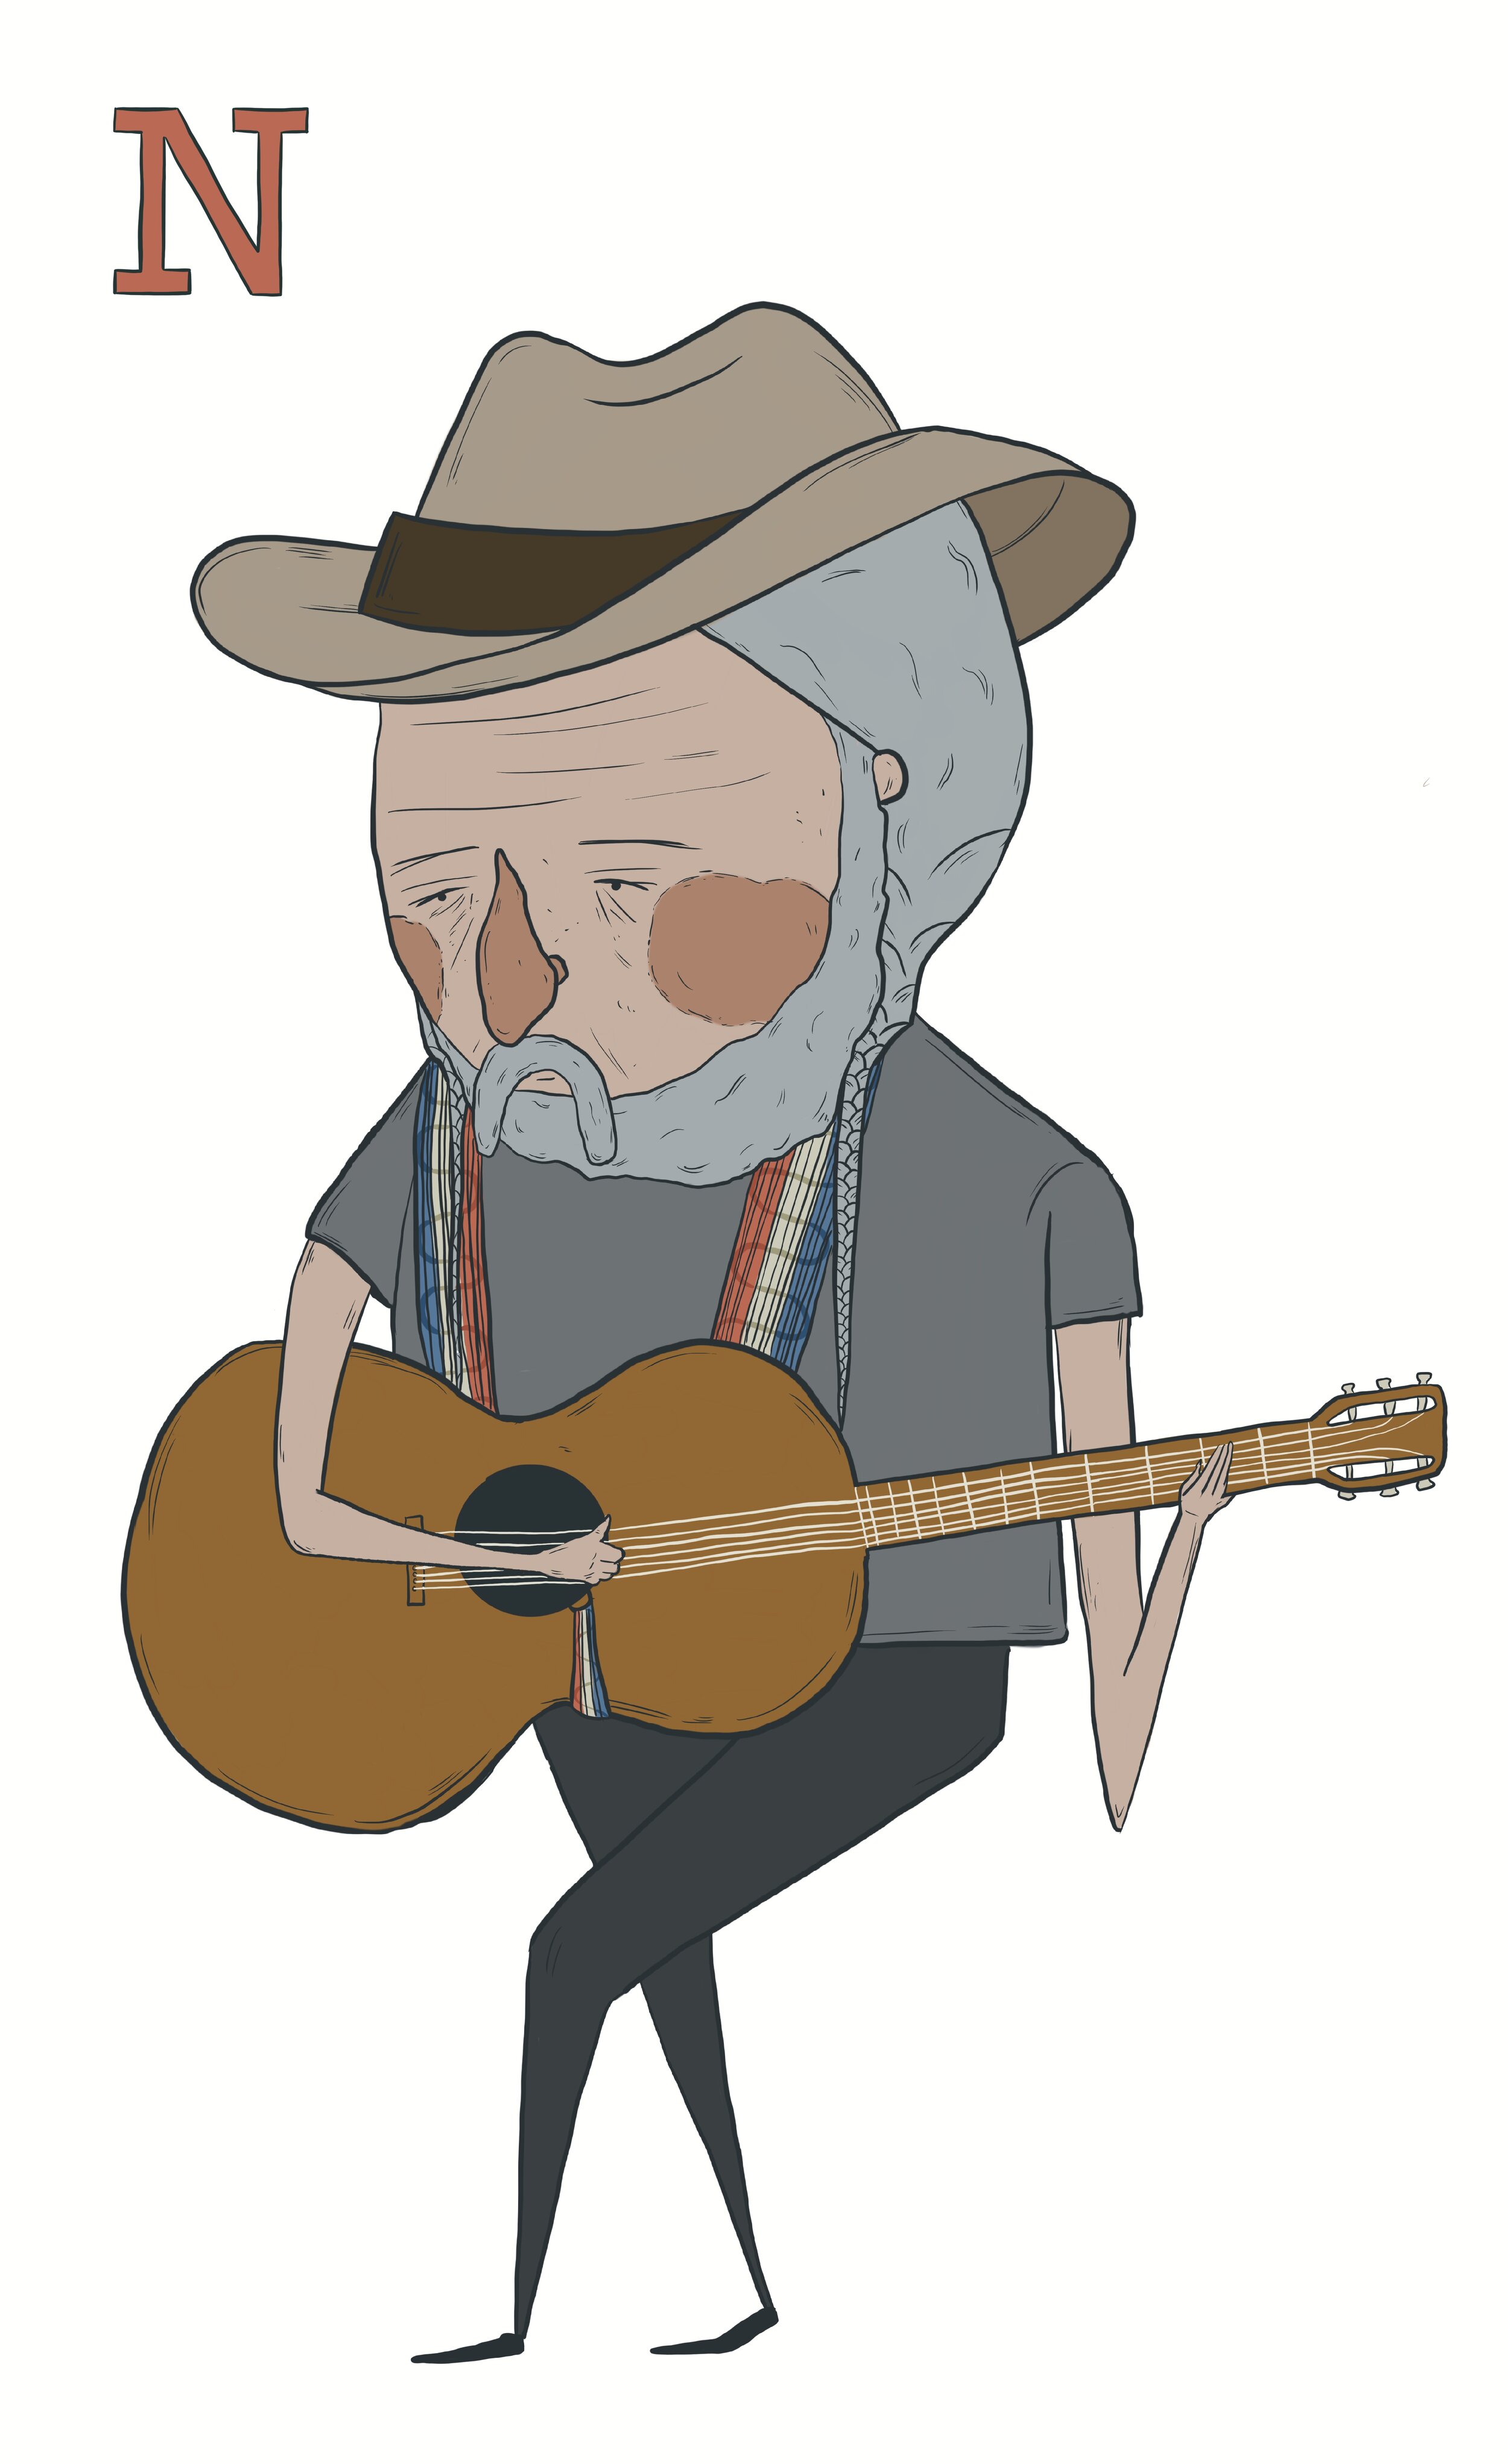 N is for Willie Nelson